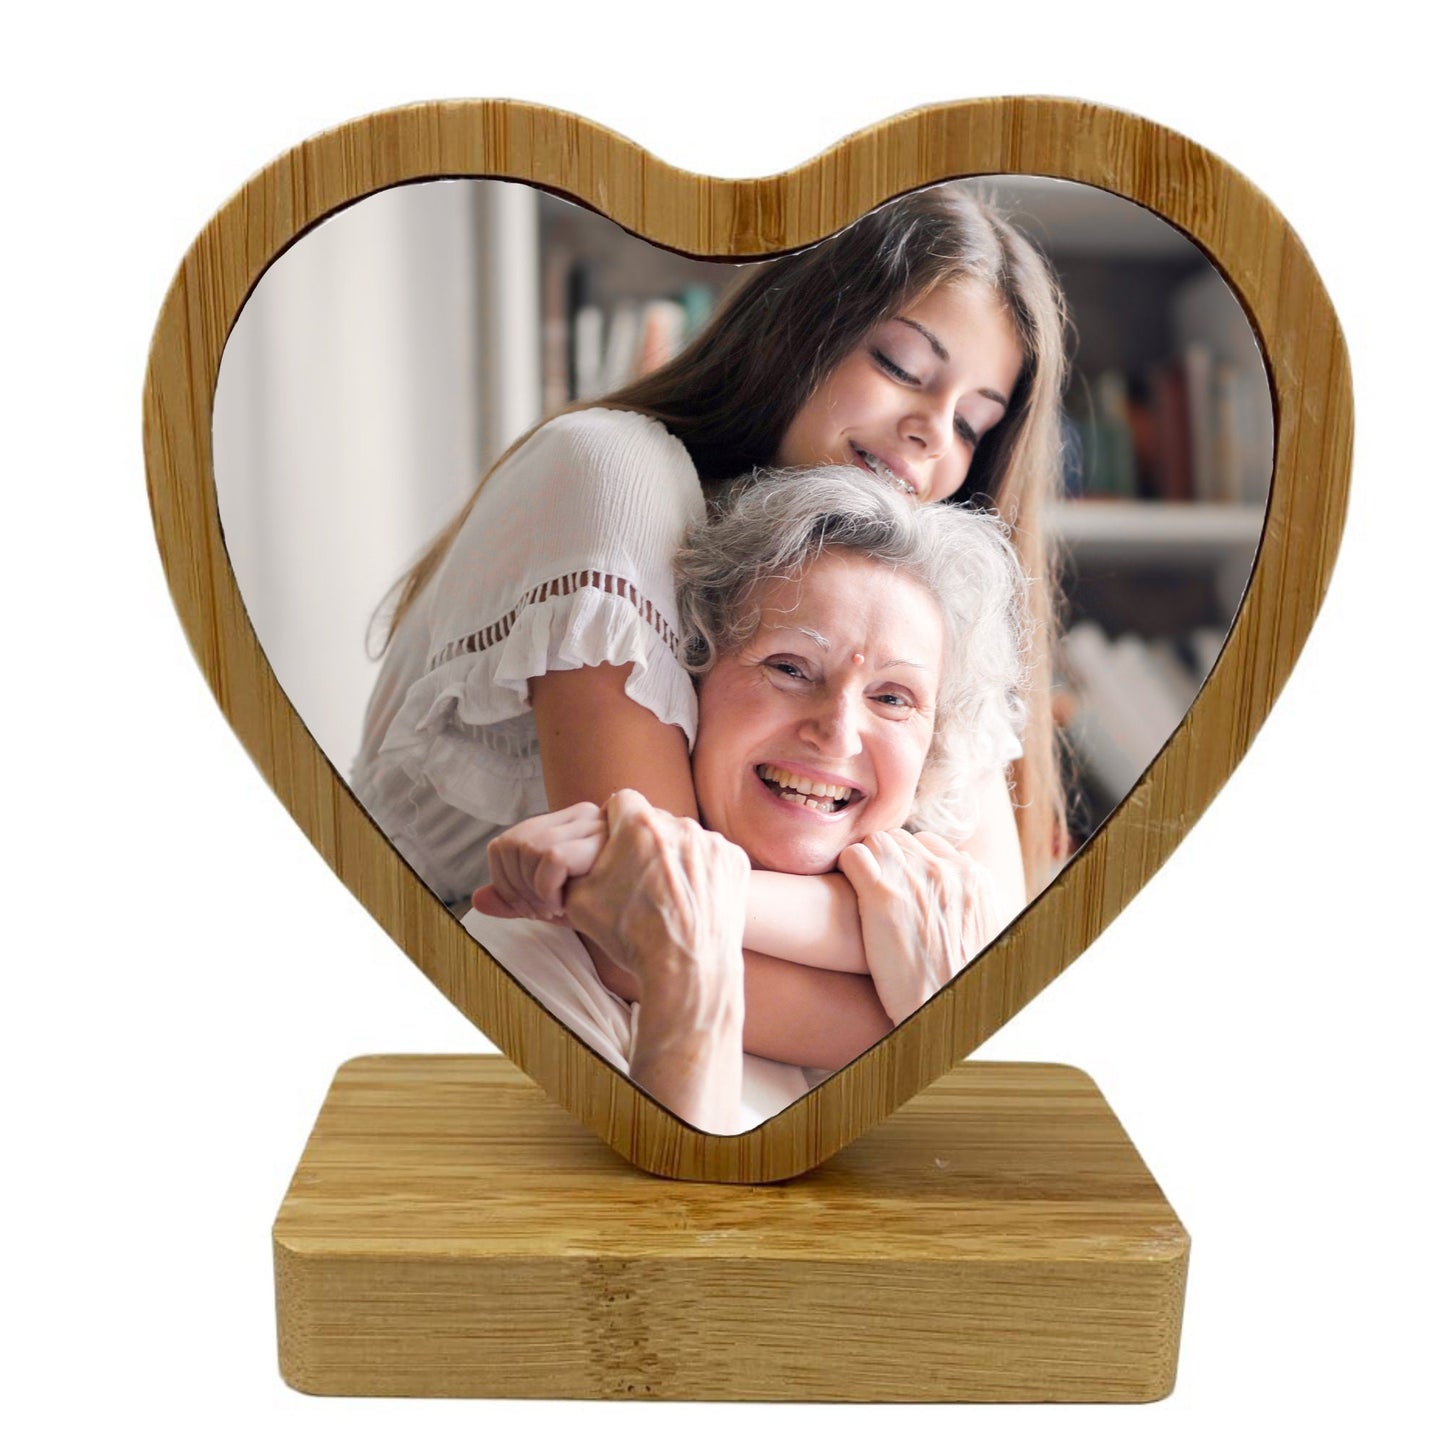 Bamboo heart eco friendly magnetic printed photo ornament